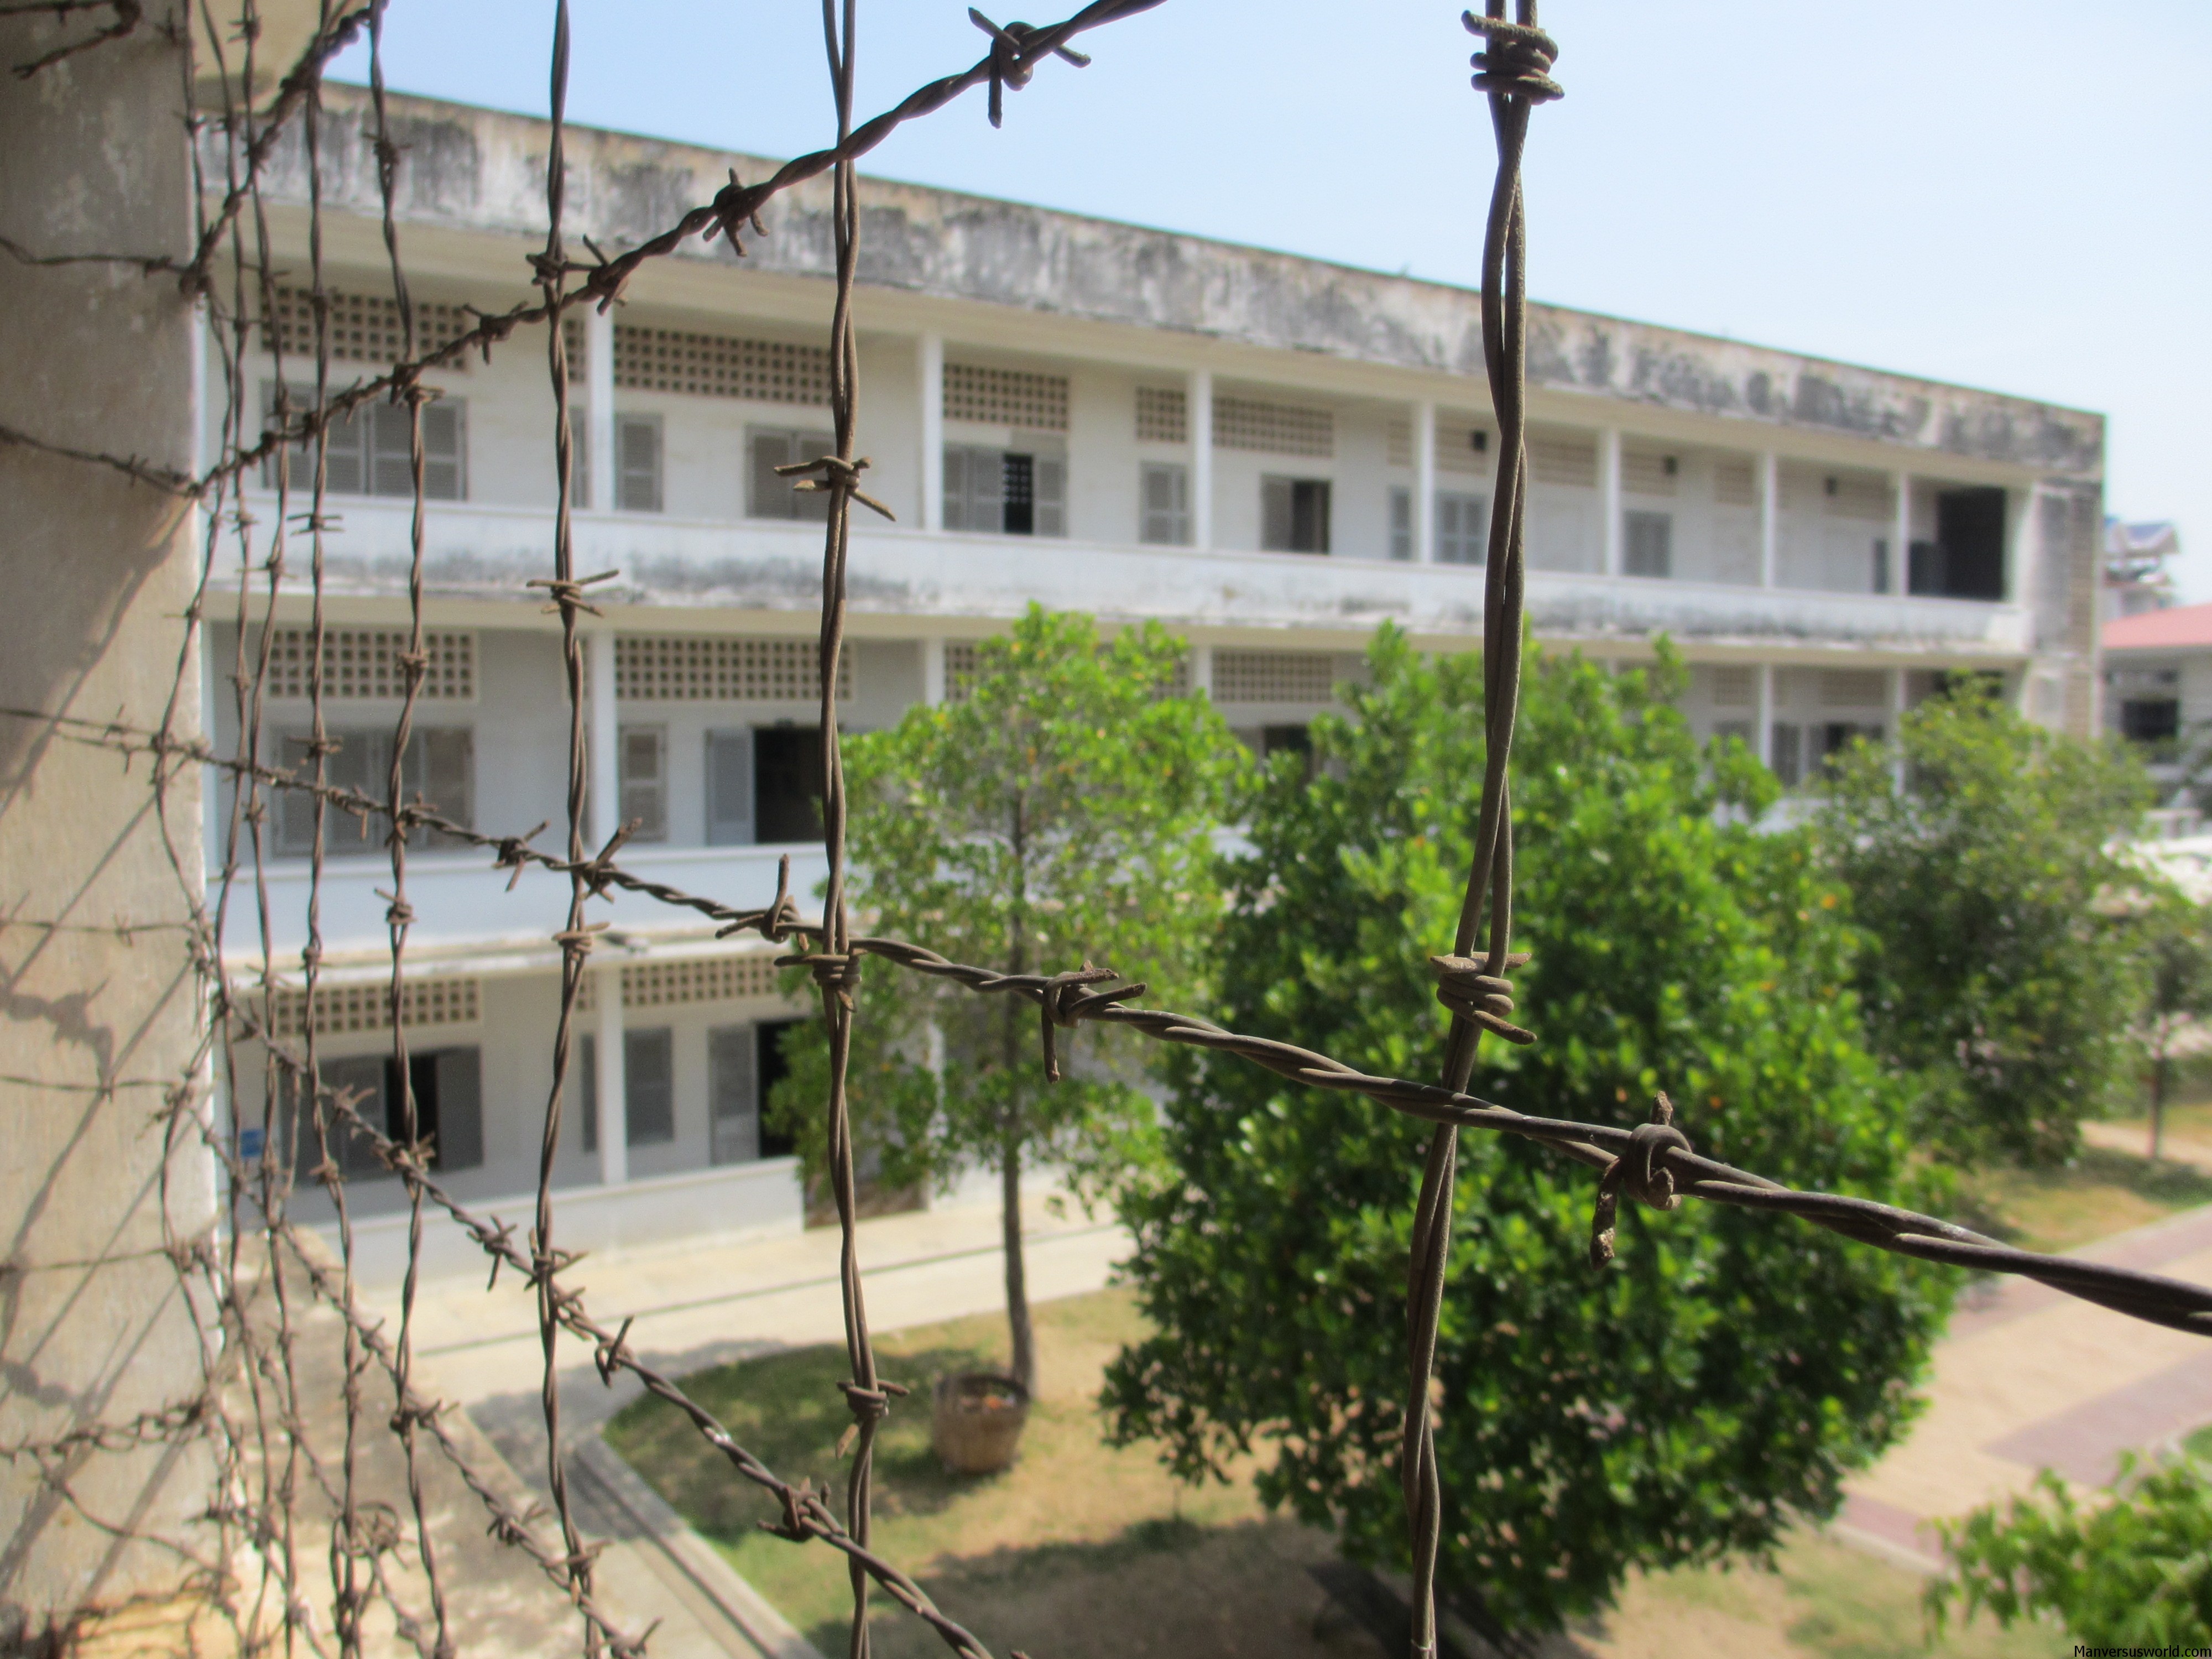 The view through barbed-wire of former Khmer Rouge torture facility S-21